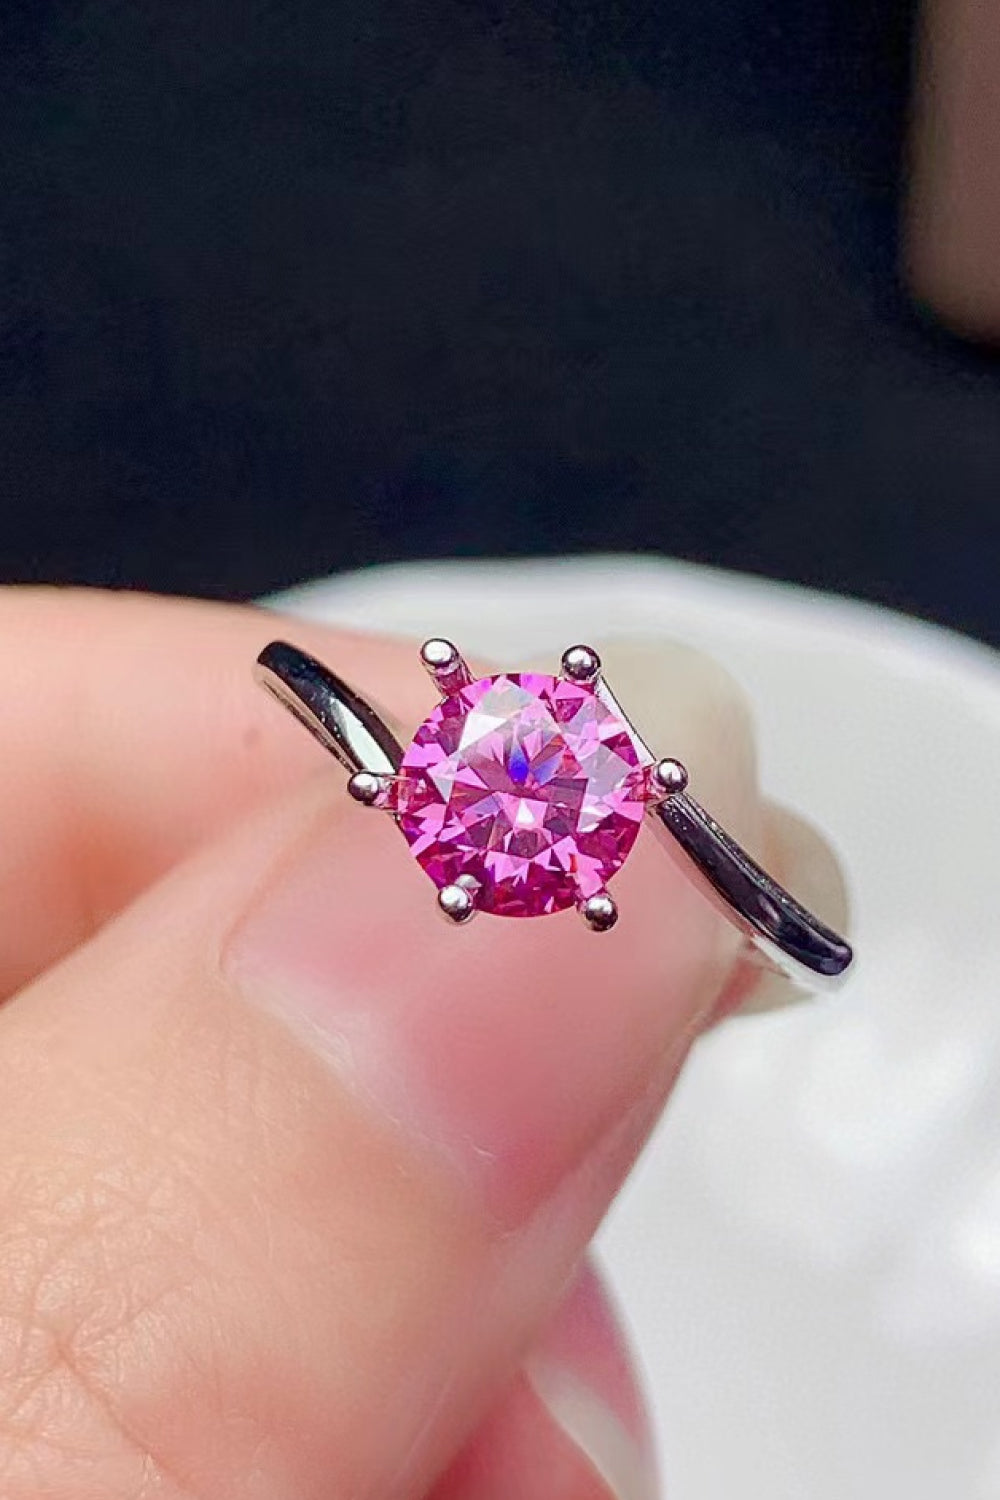 Can't Stop Your Shine 1 Carat Pink Brilliant Round Cut Moissanite Ring (Platinum Over Pure Sterling Silver)